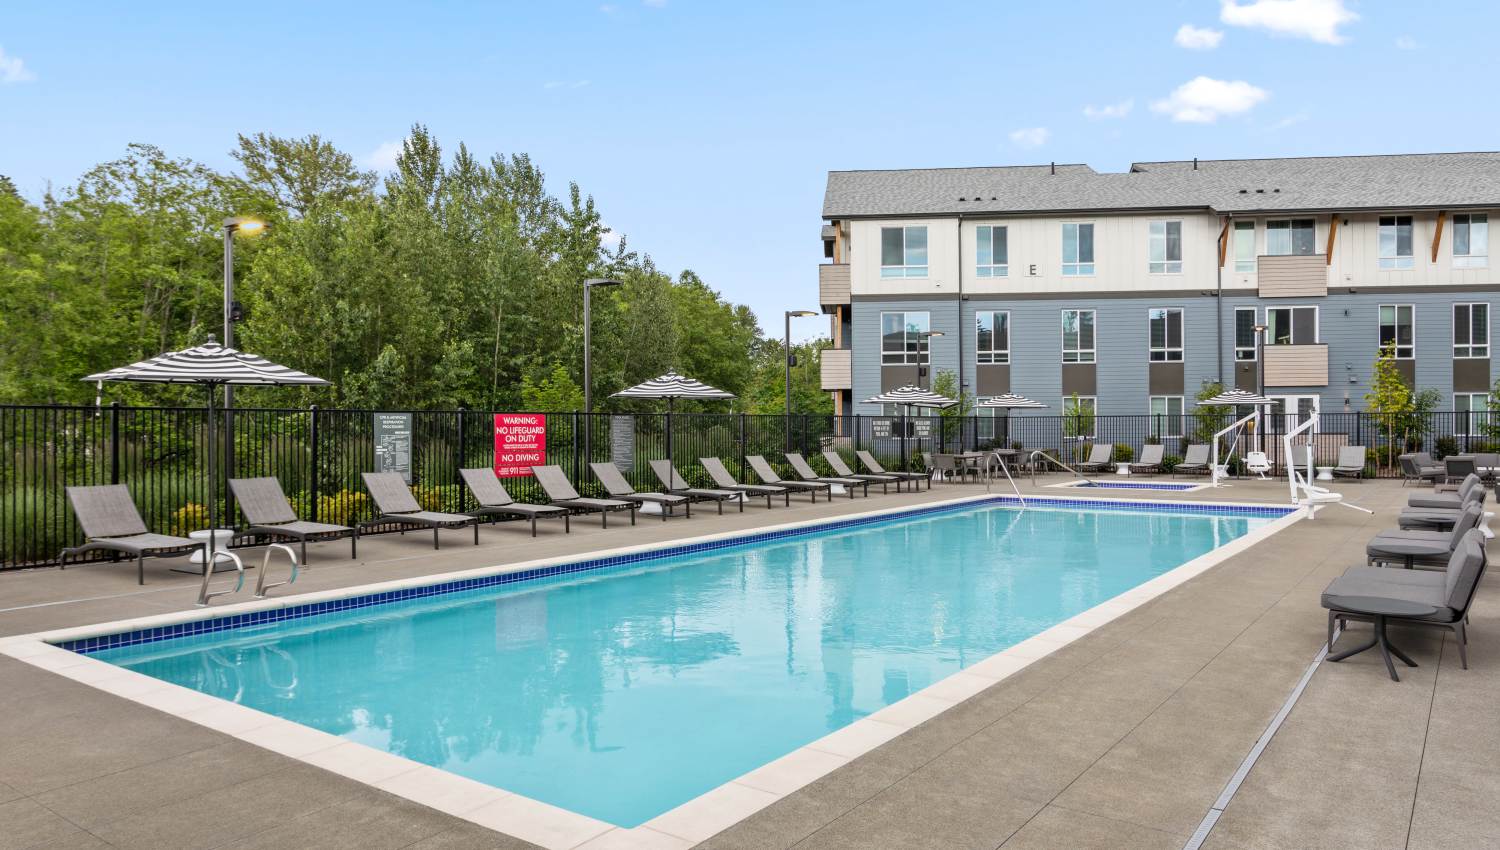 Swimming pool and lounge chairs at 207 East in Edgewood, Washington